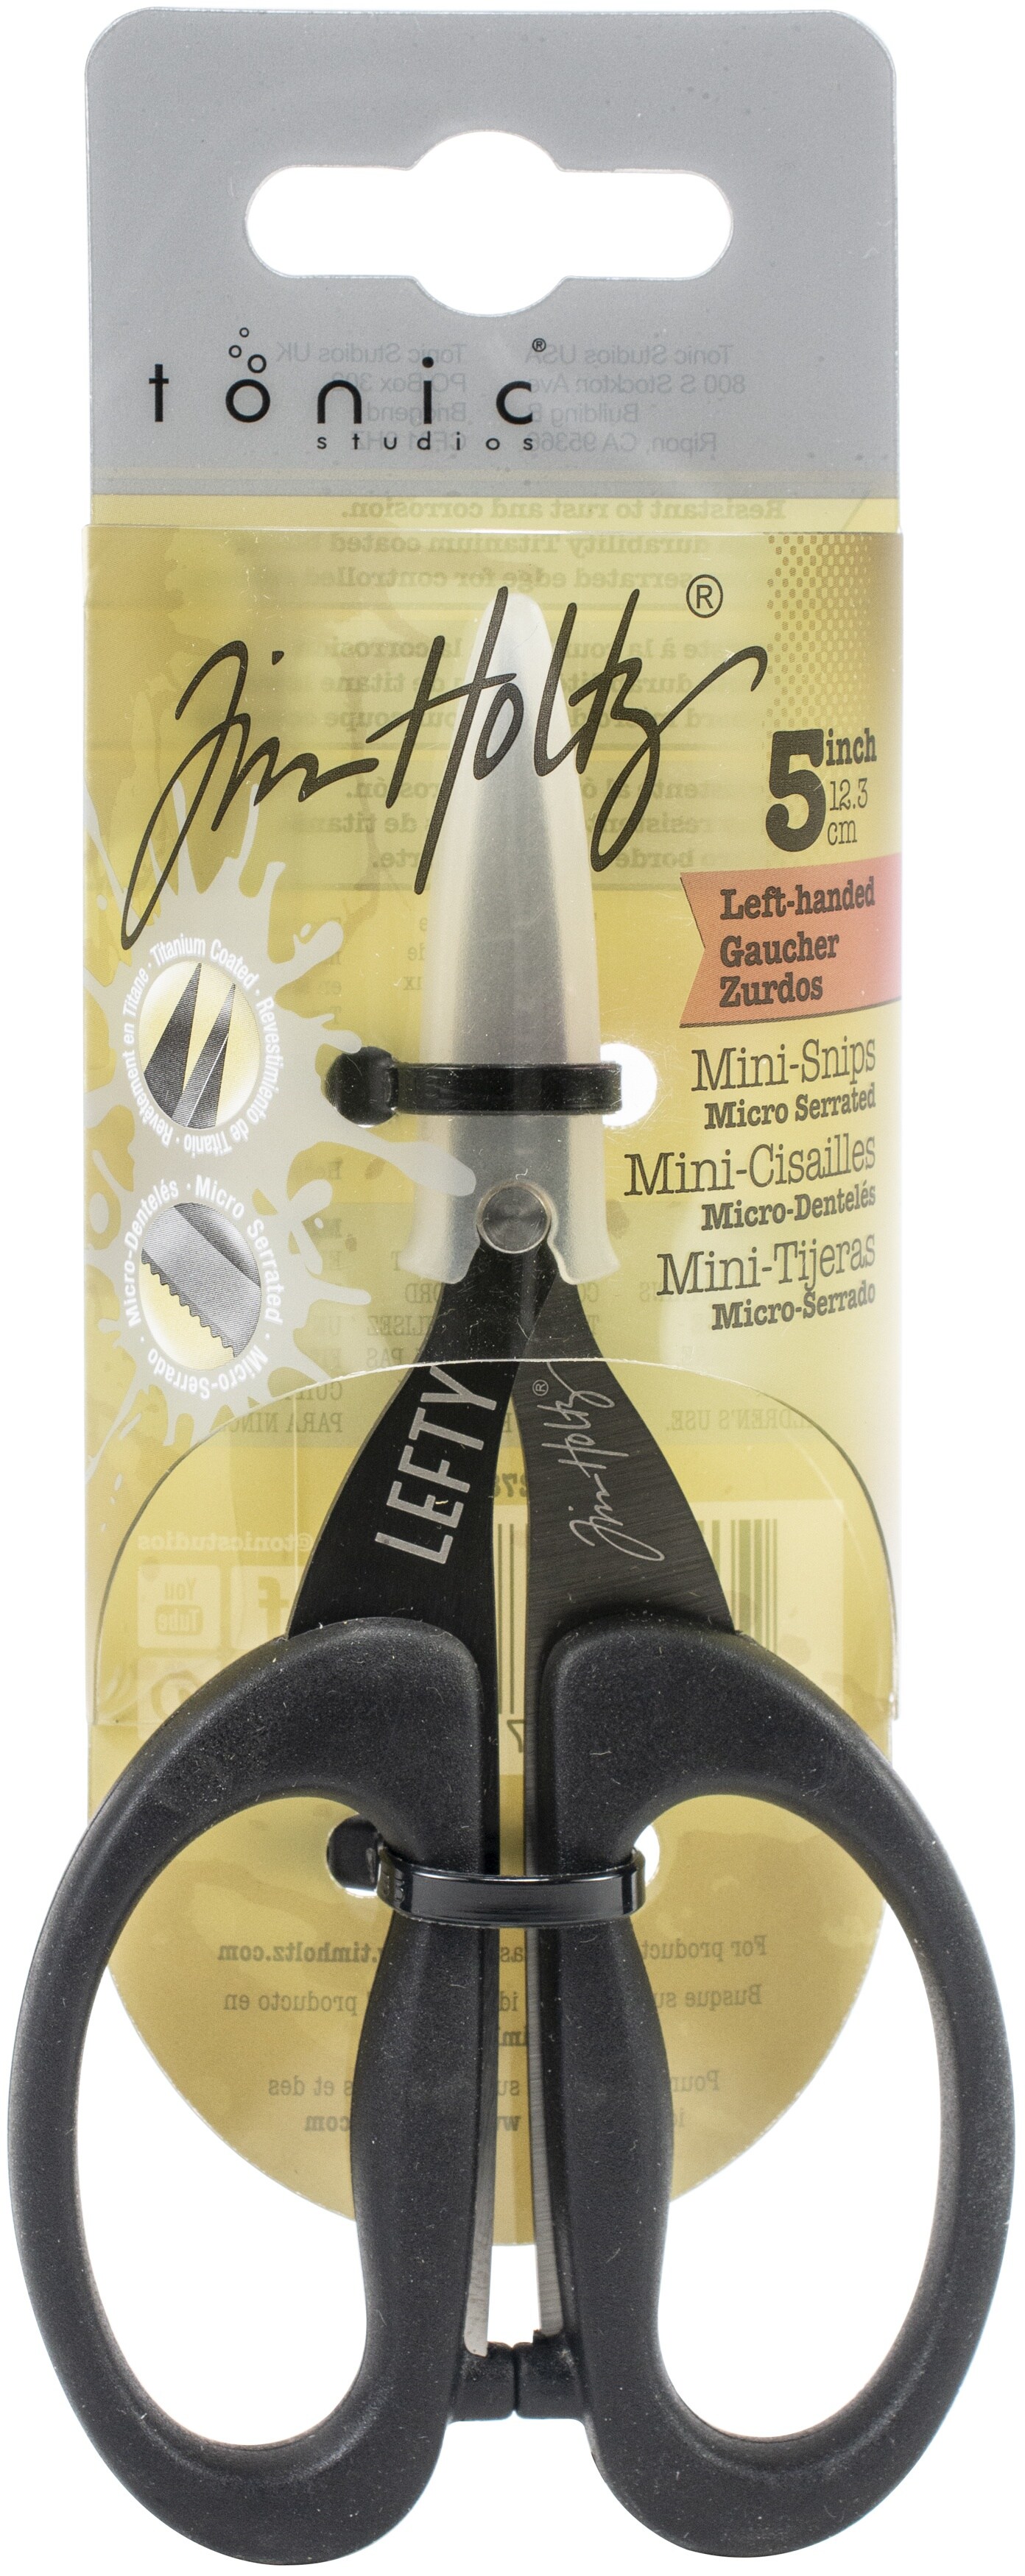 Tim Holtz Left Handed Scissors - 5 Inch Mini Snips with Micro Serrated Blade - Lefty Craft Tool for Cutting Paper, Fabric, and Sewing - Titanium with Black Comfort Grip Handles